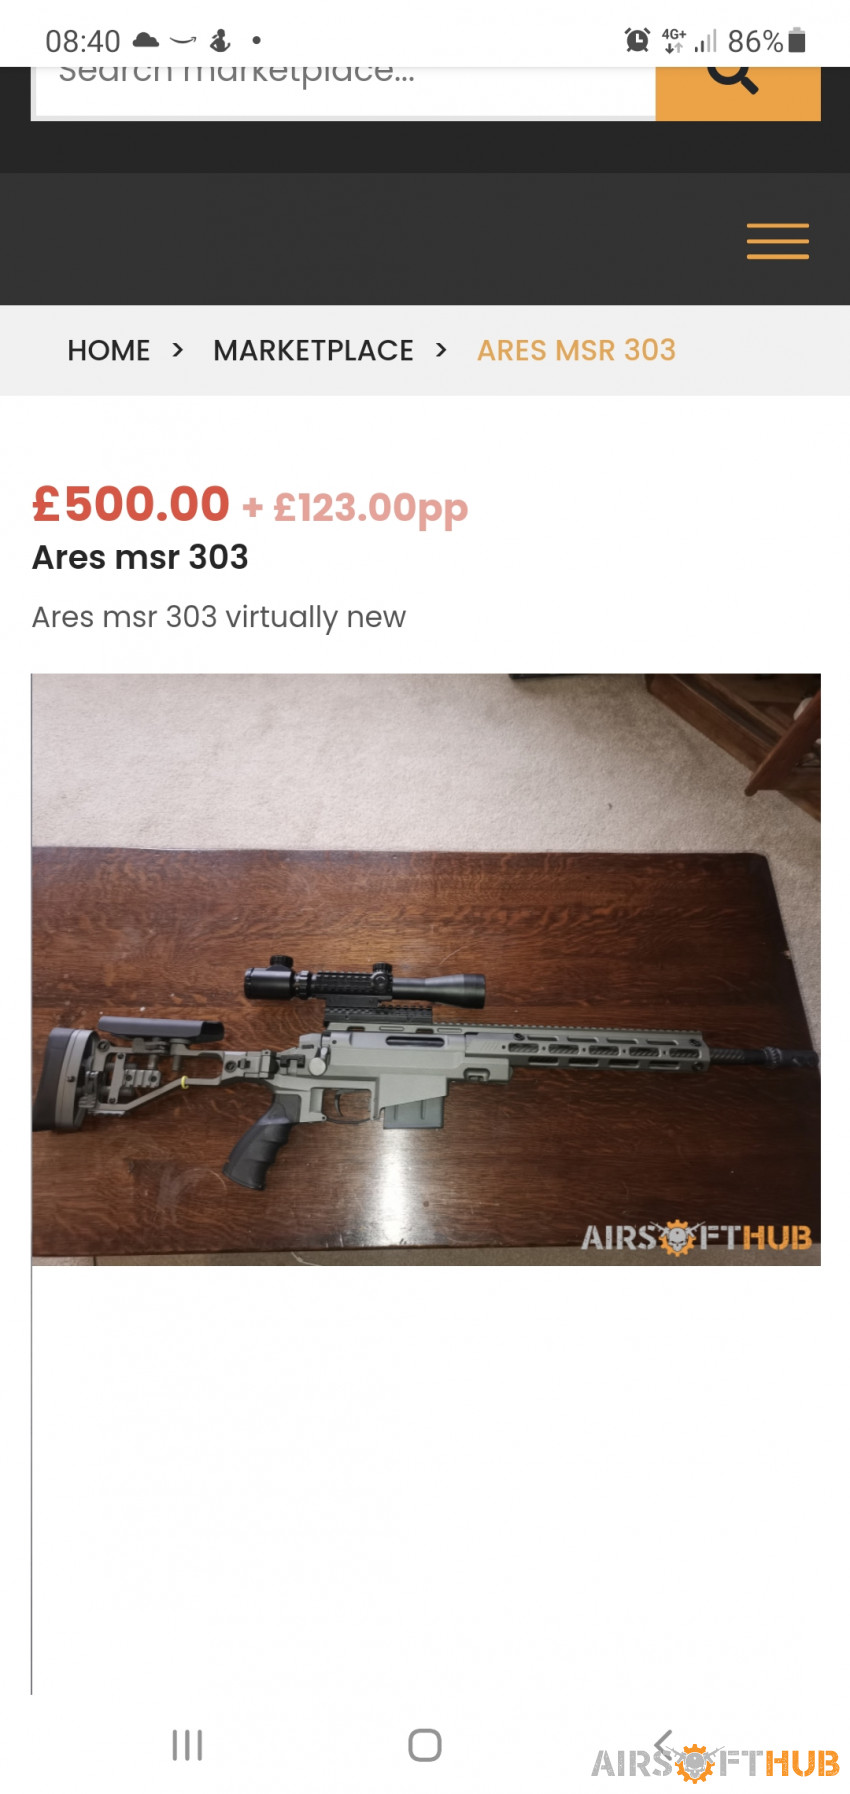 Ares msr 303 - Used airsoft equipment